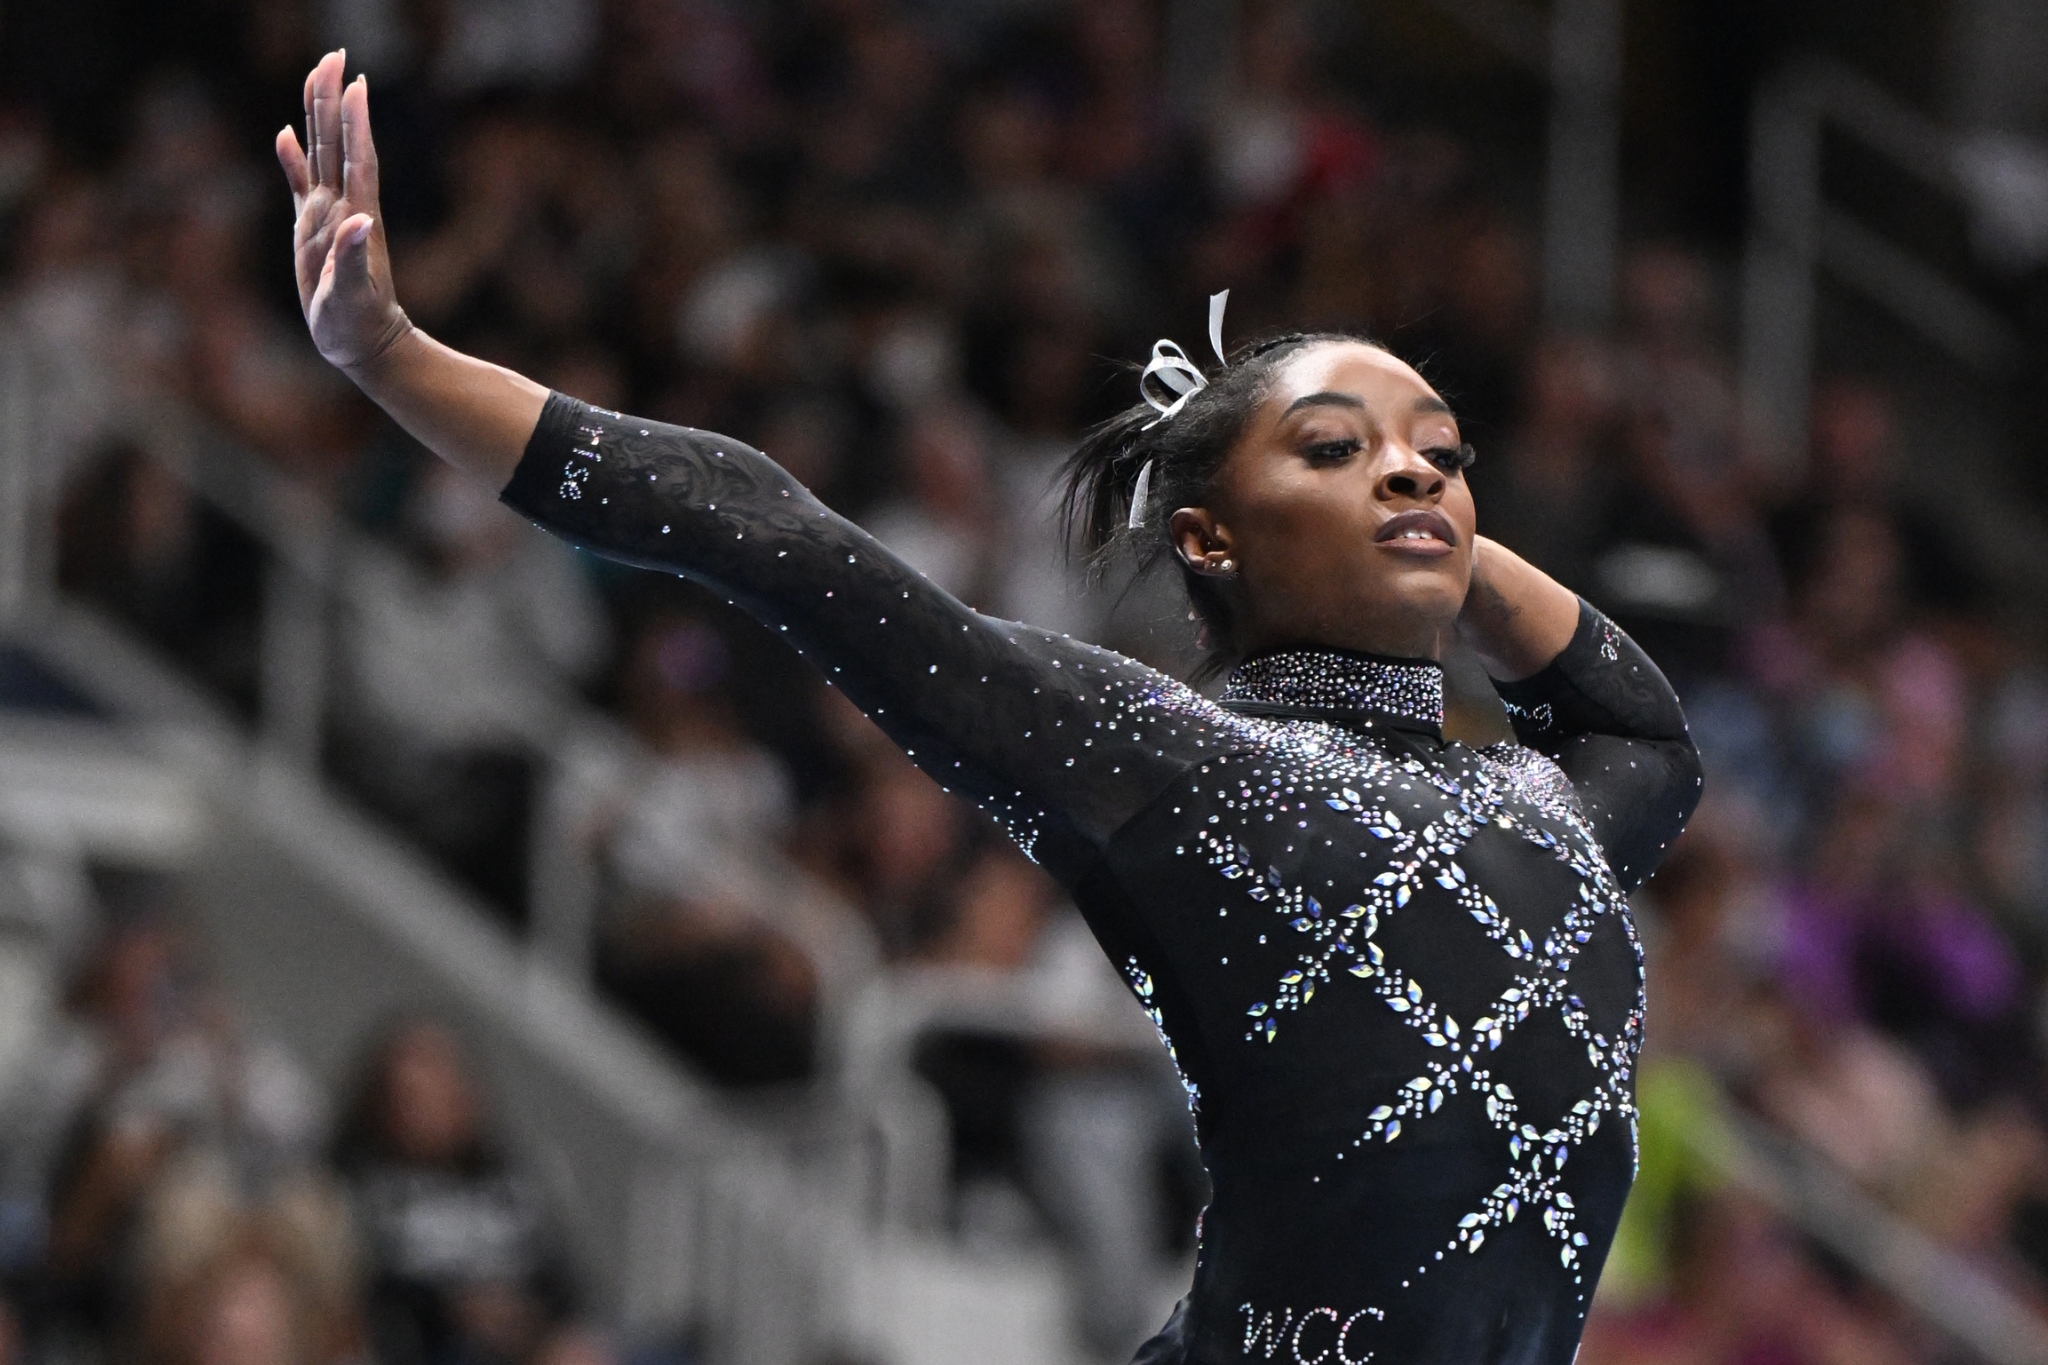 Simone Biles competes on beam during Day 2 of senior women's competition at the 2023 Xfinity U.S. Gymnastics Championships.